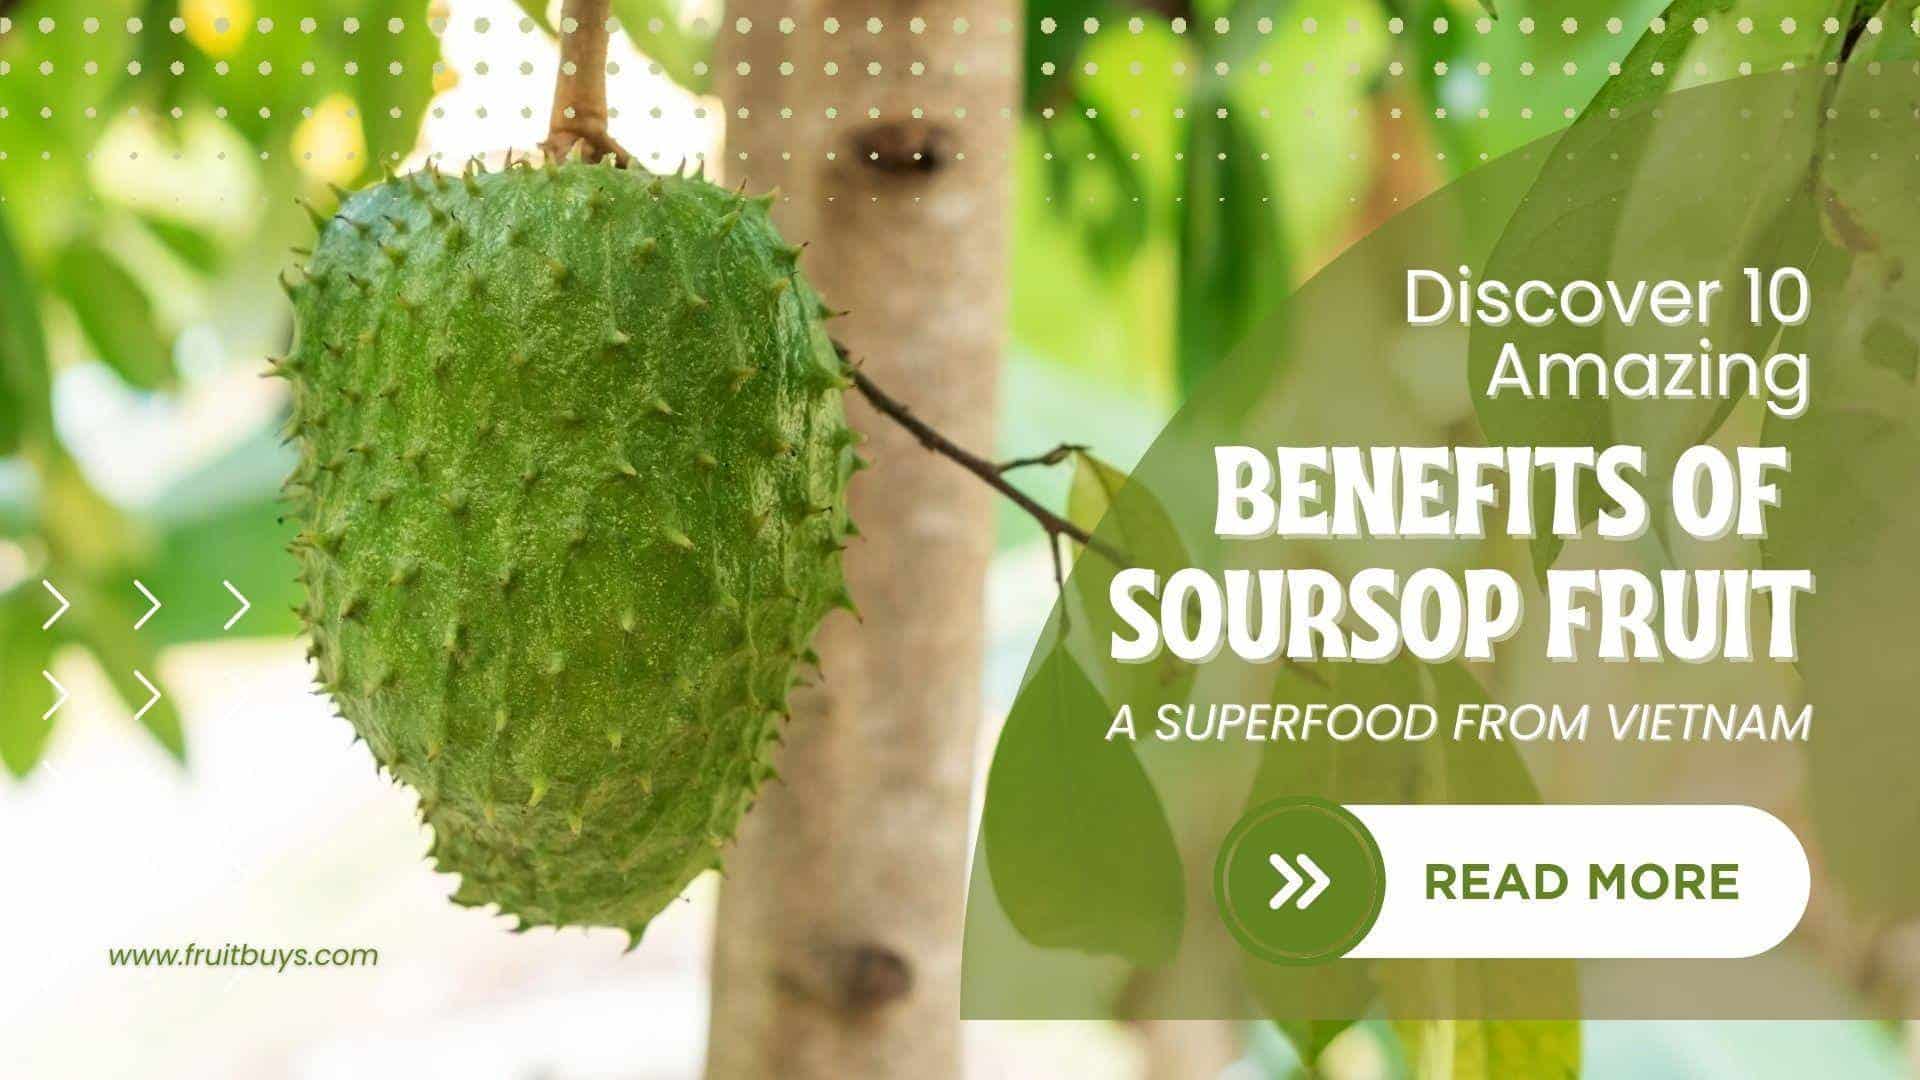 FruitBuys Vietnam  Discover 10 Amazing Benefits Of Soursop Fruit A Superfood From Vietnam